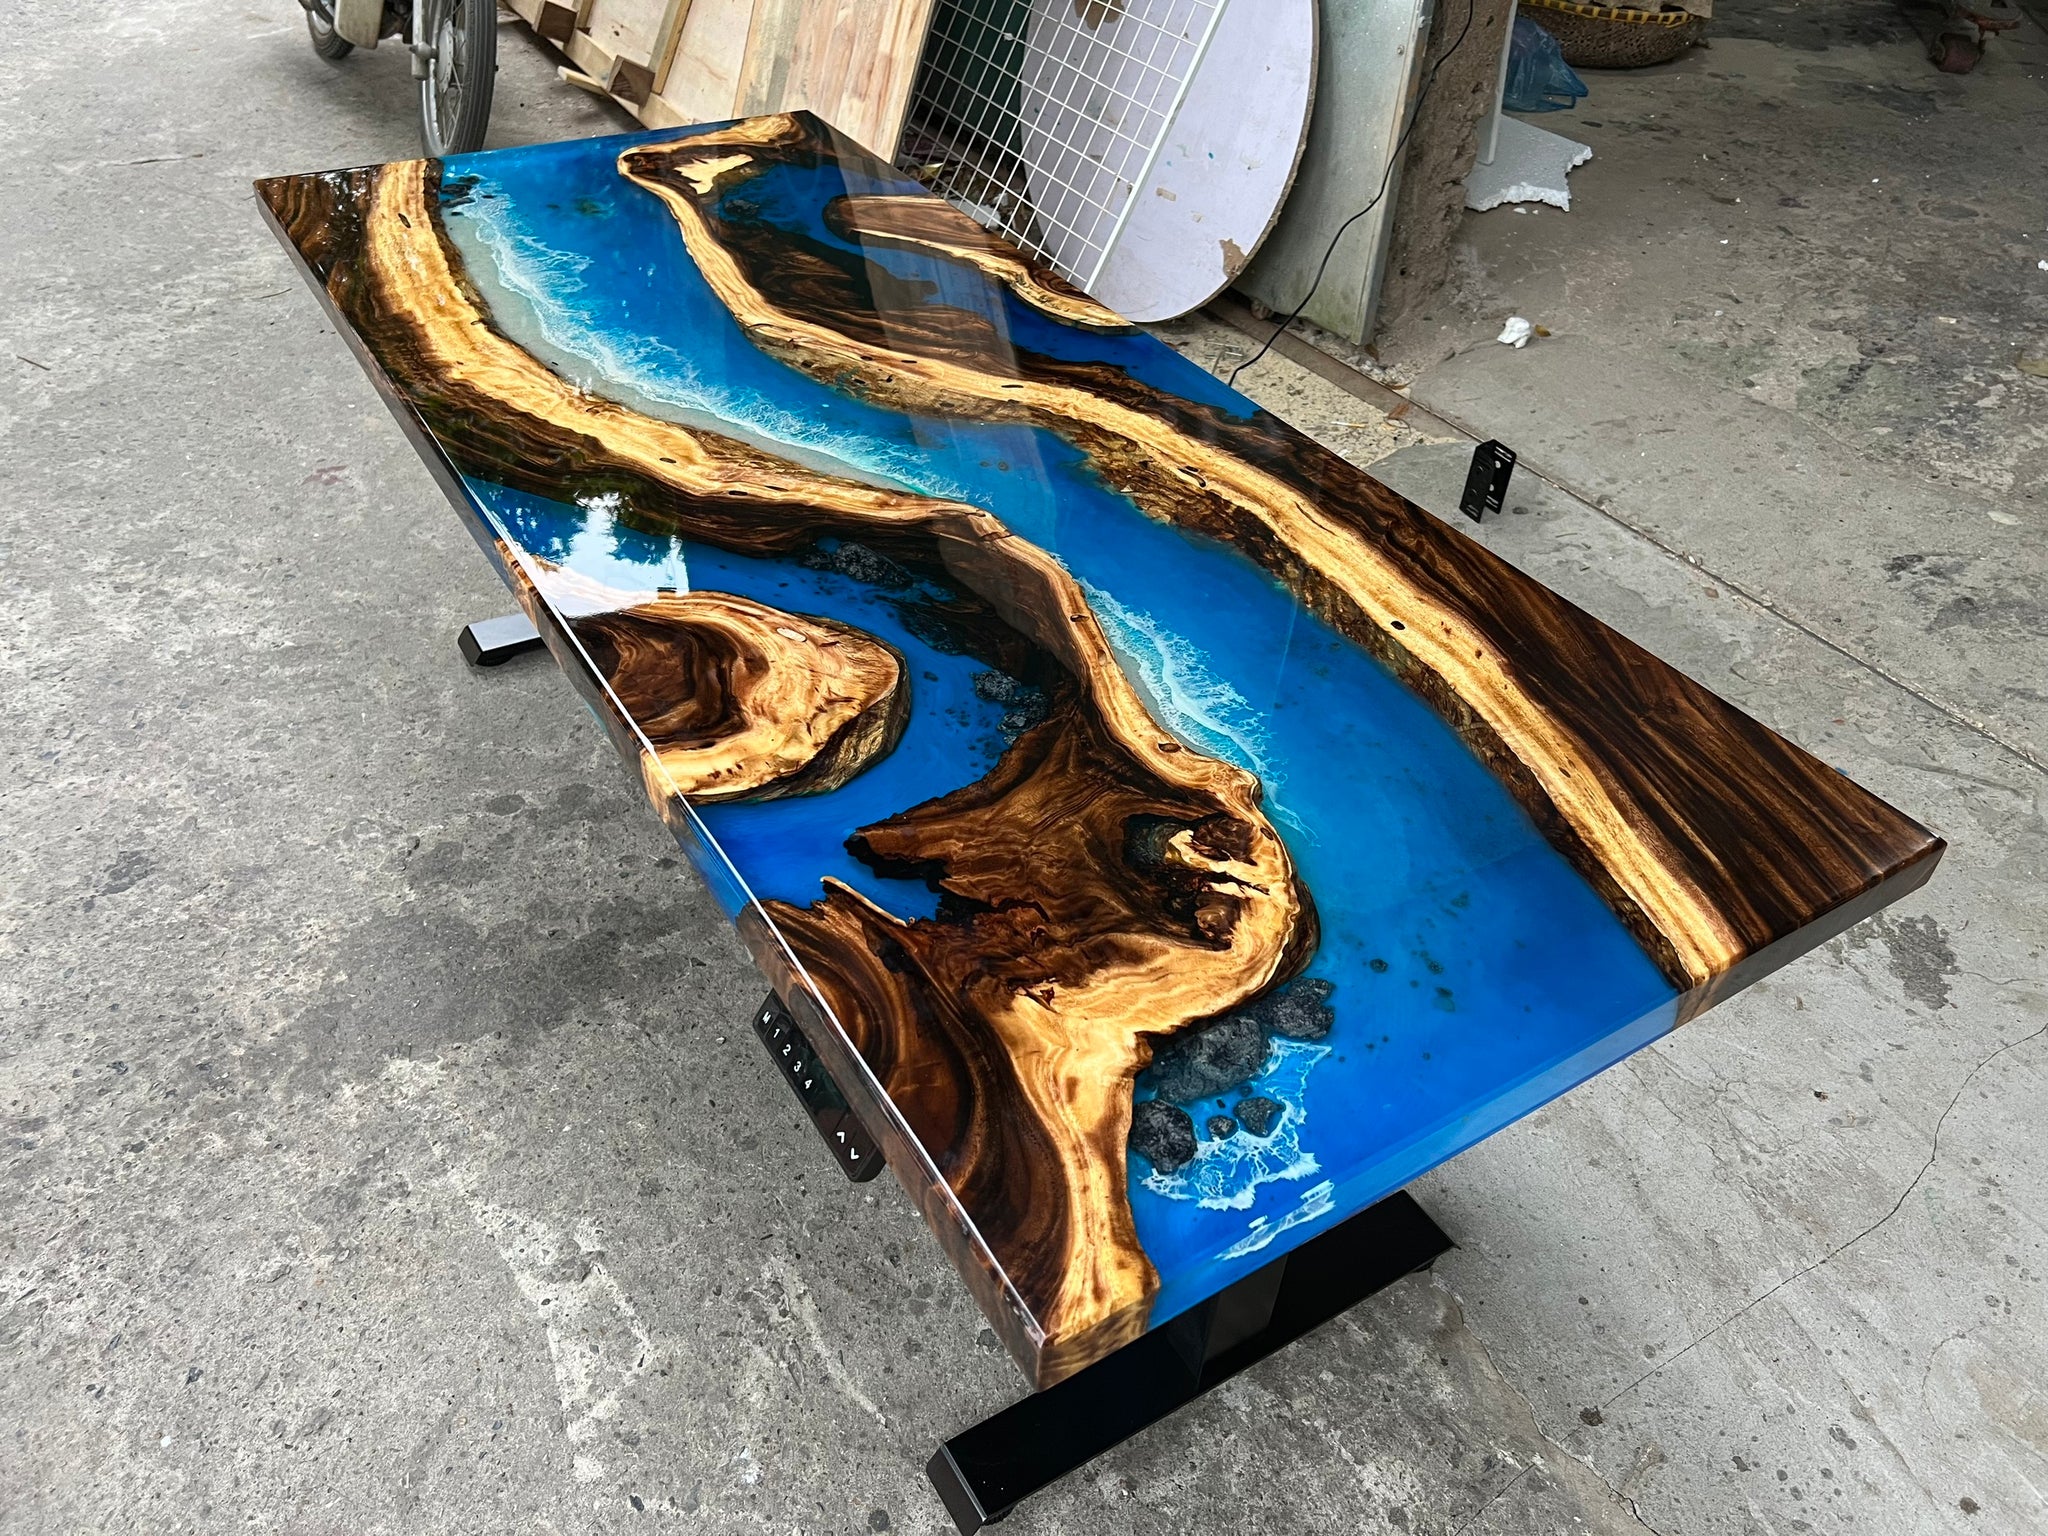 Personalized Ocean Resin Epoxy Table, Handmade Ocean Dining Table, Liv